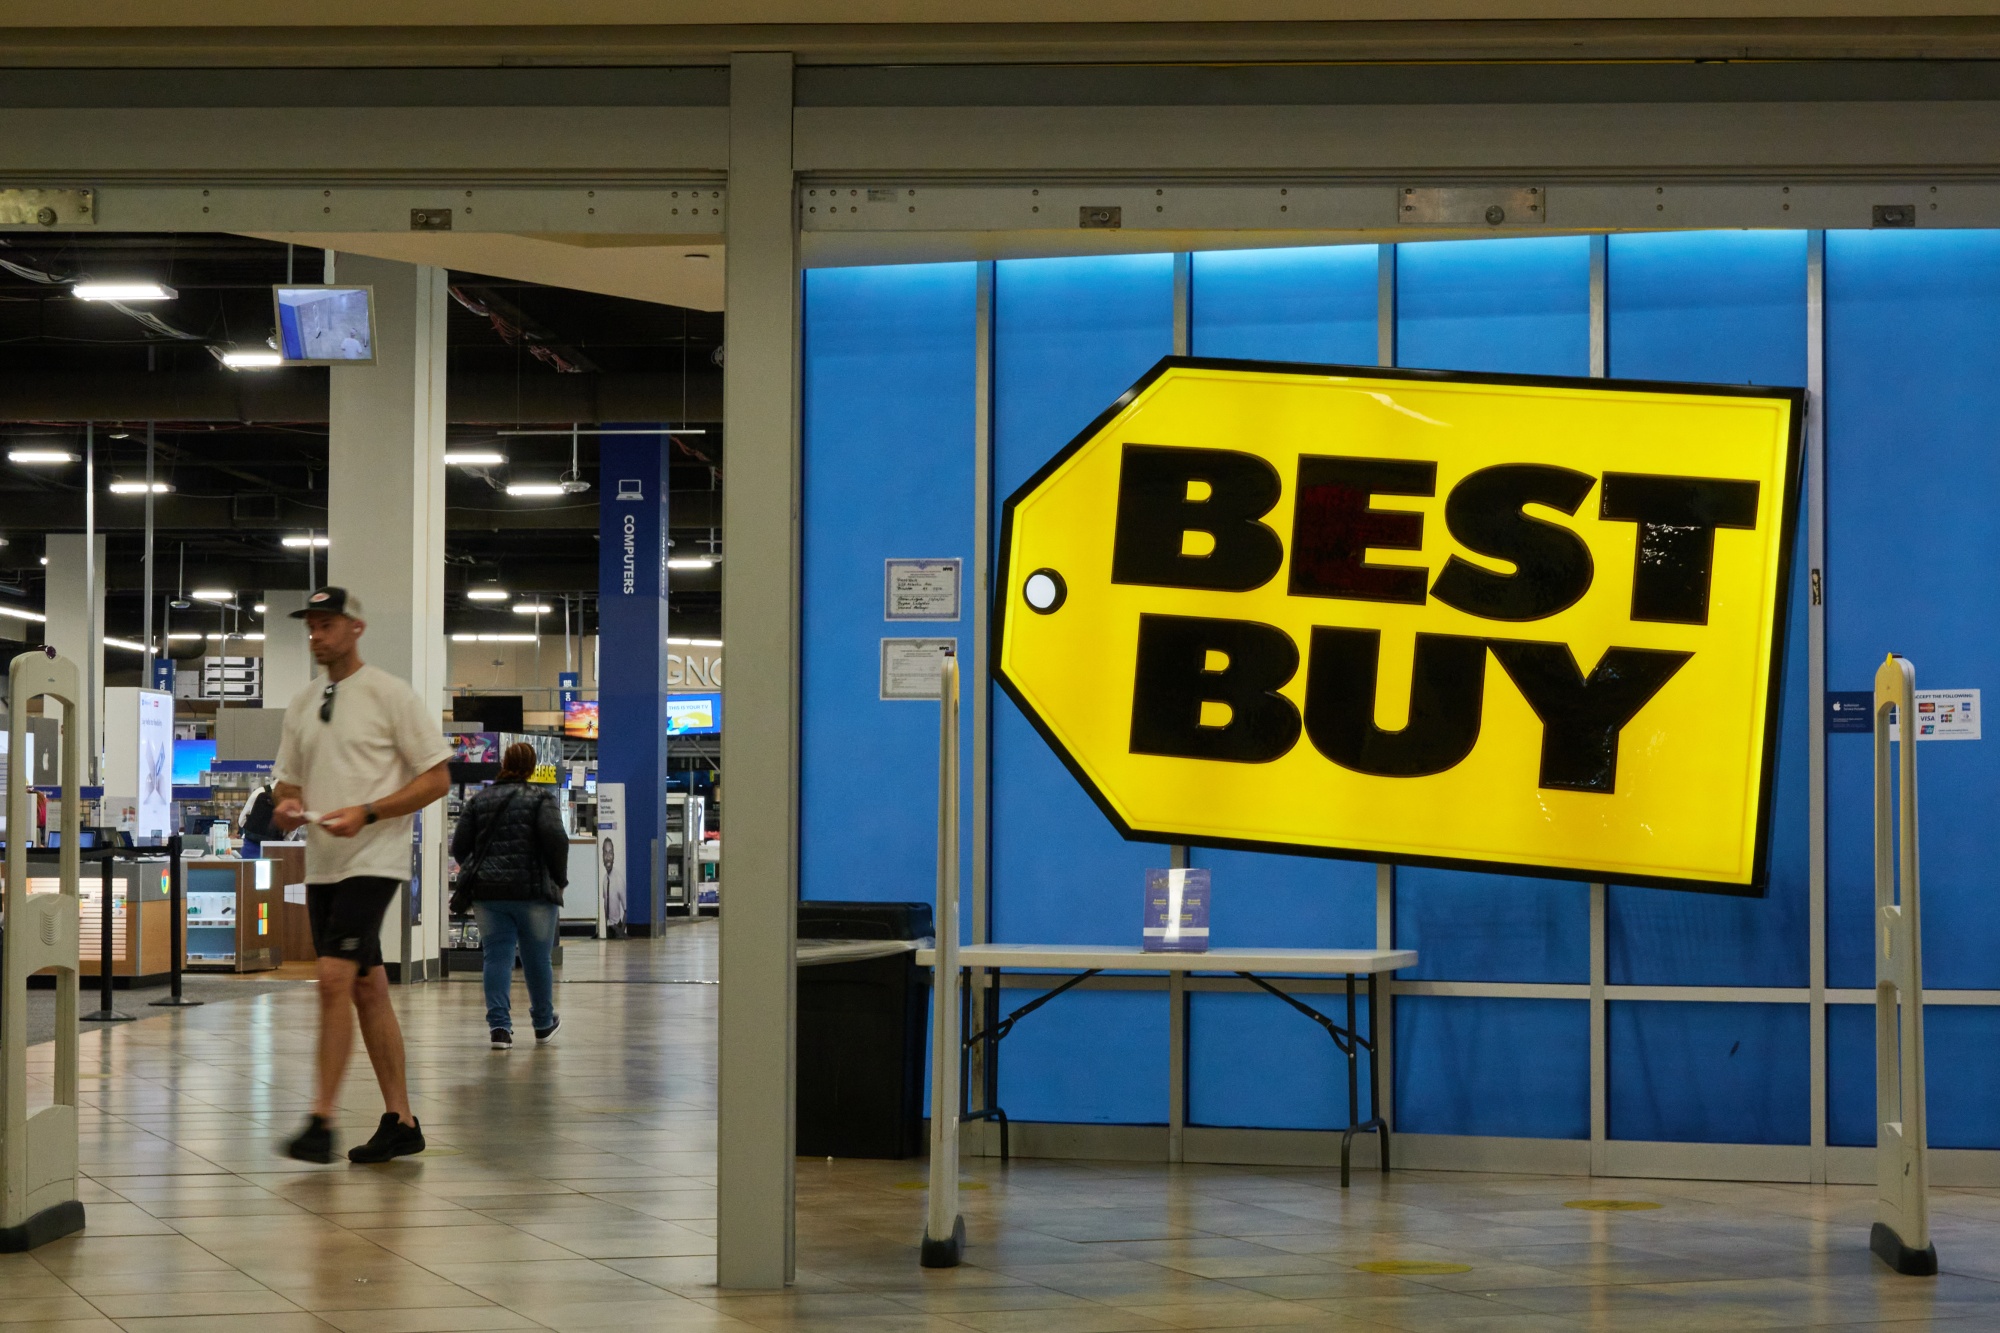 Best Buy (BBY) Says Deep Sales Slump Is Showing Signs of Bottoming